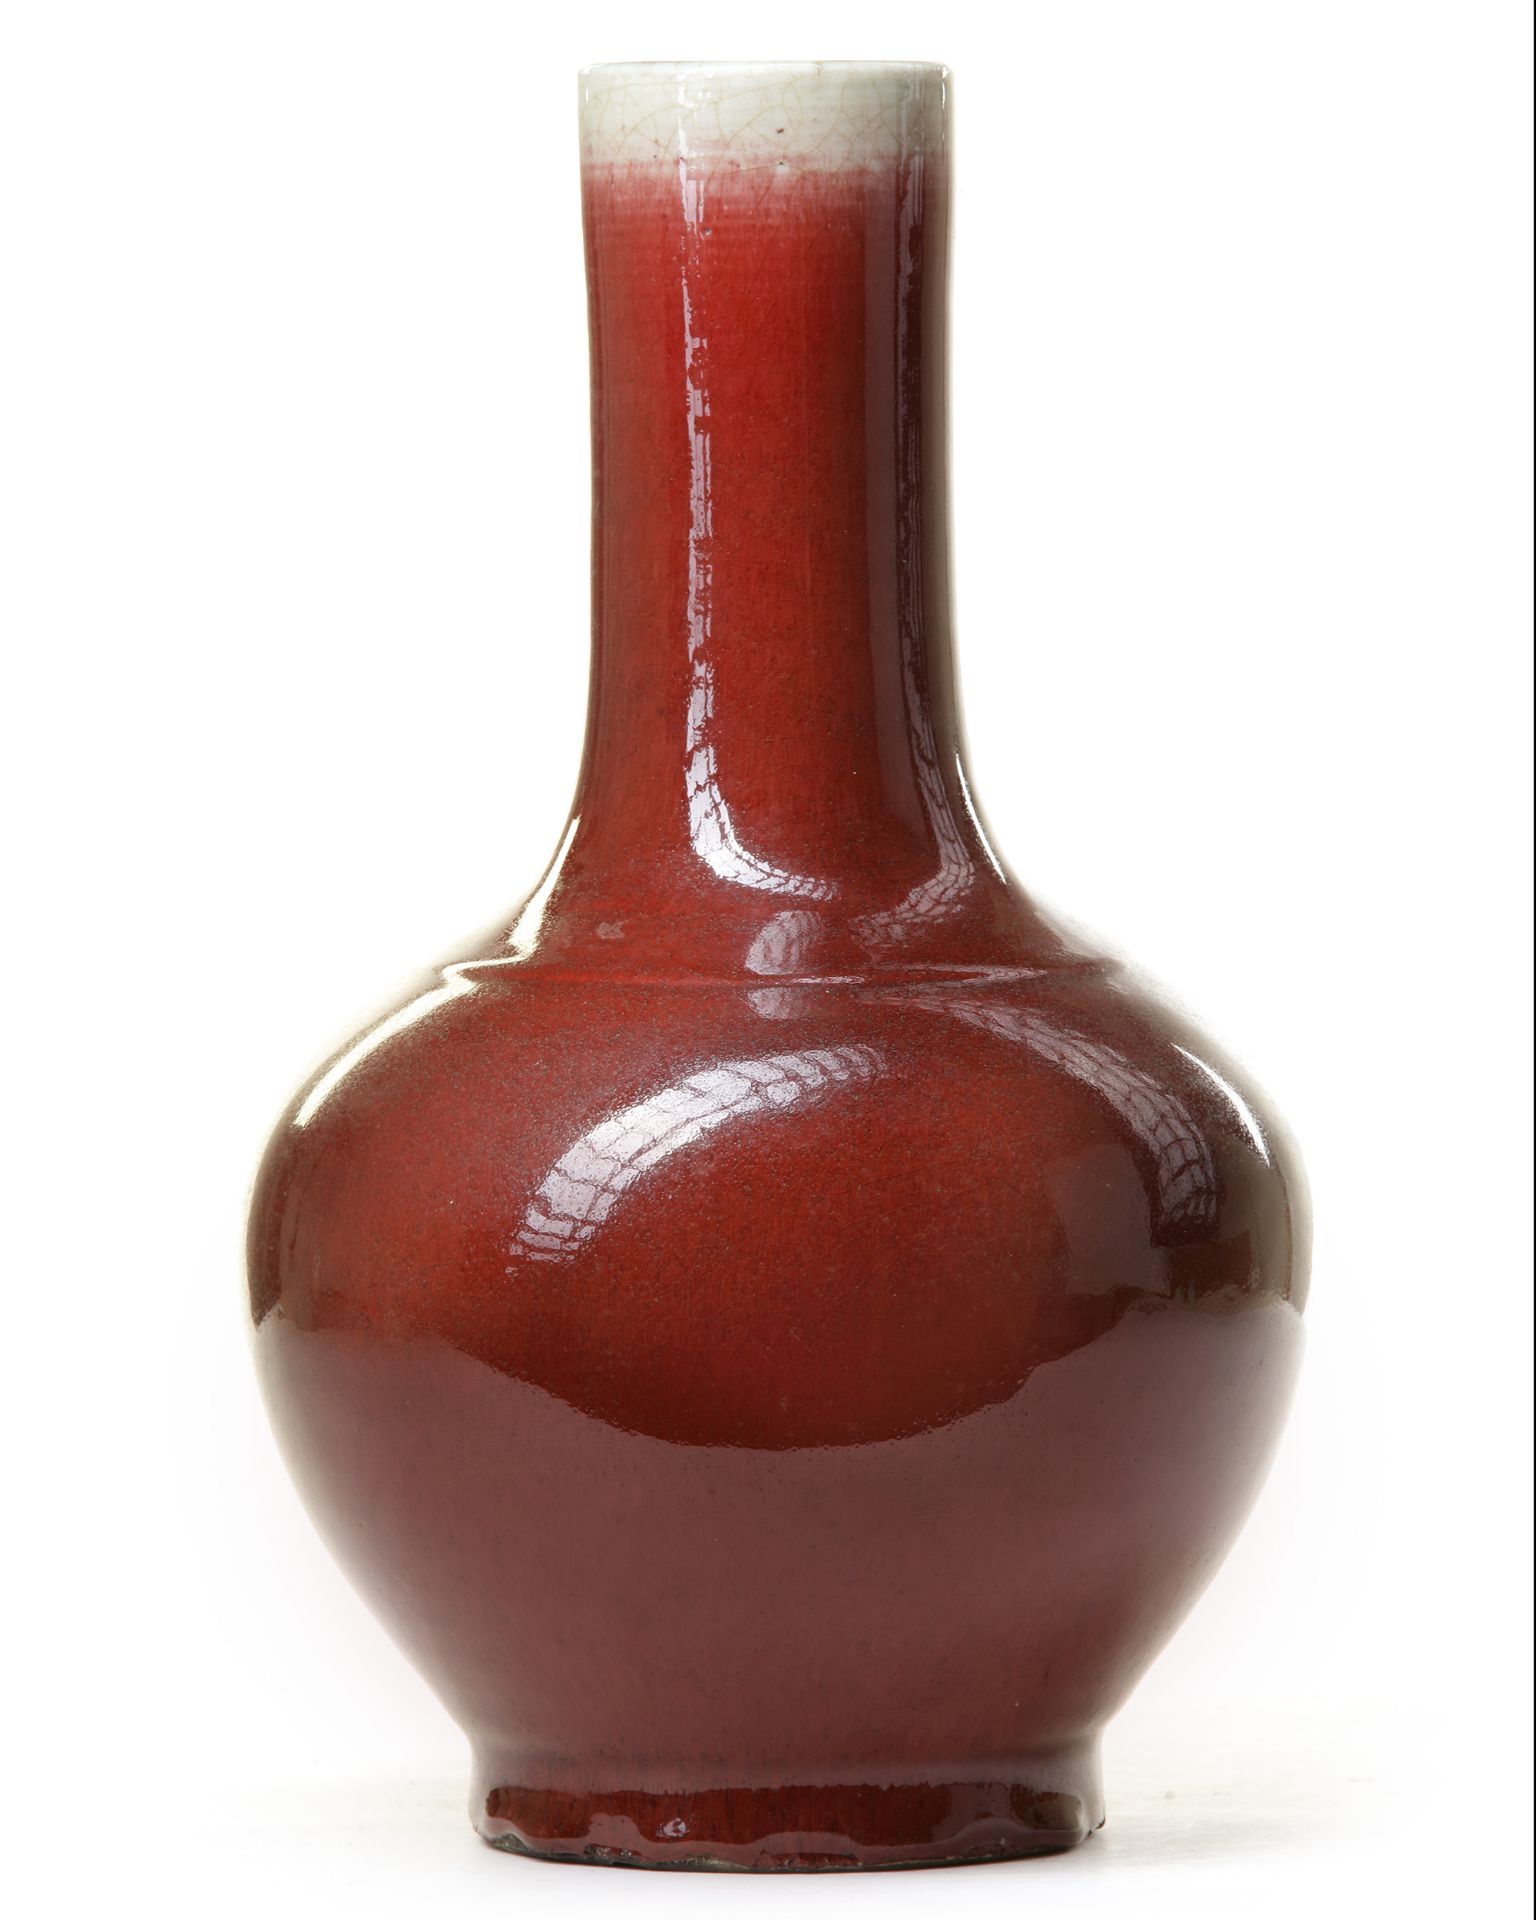 A CHINESE COPPER-RED-GLAZED BOTTLE VASE, 19TH CENTURY - Image 3 of 4